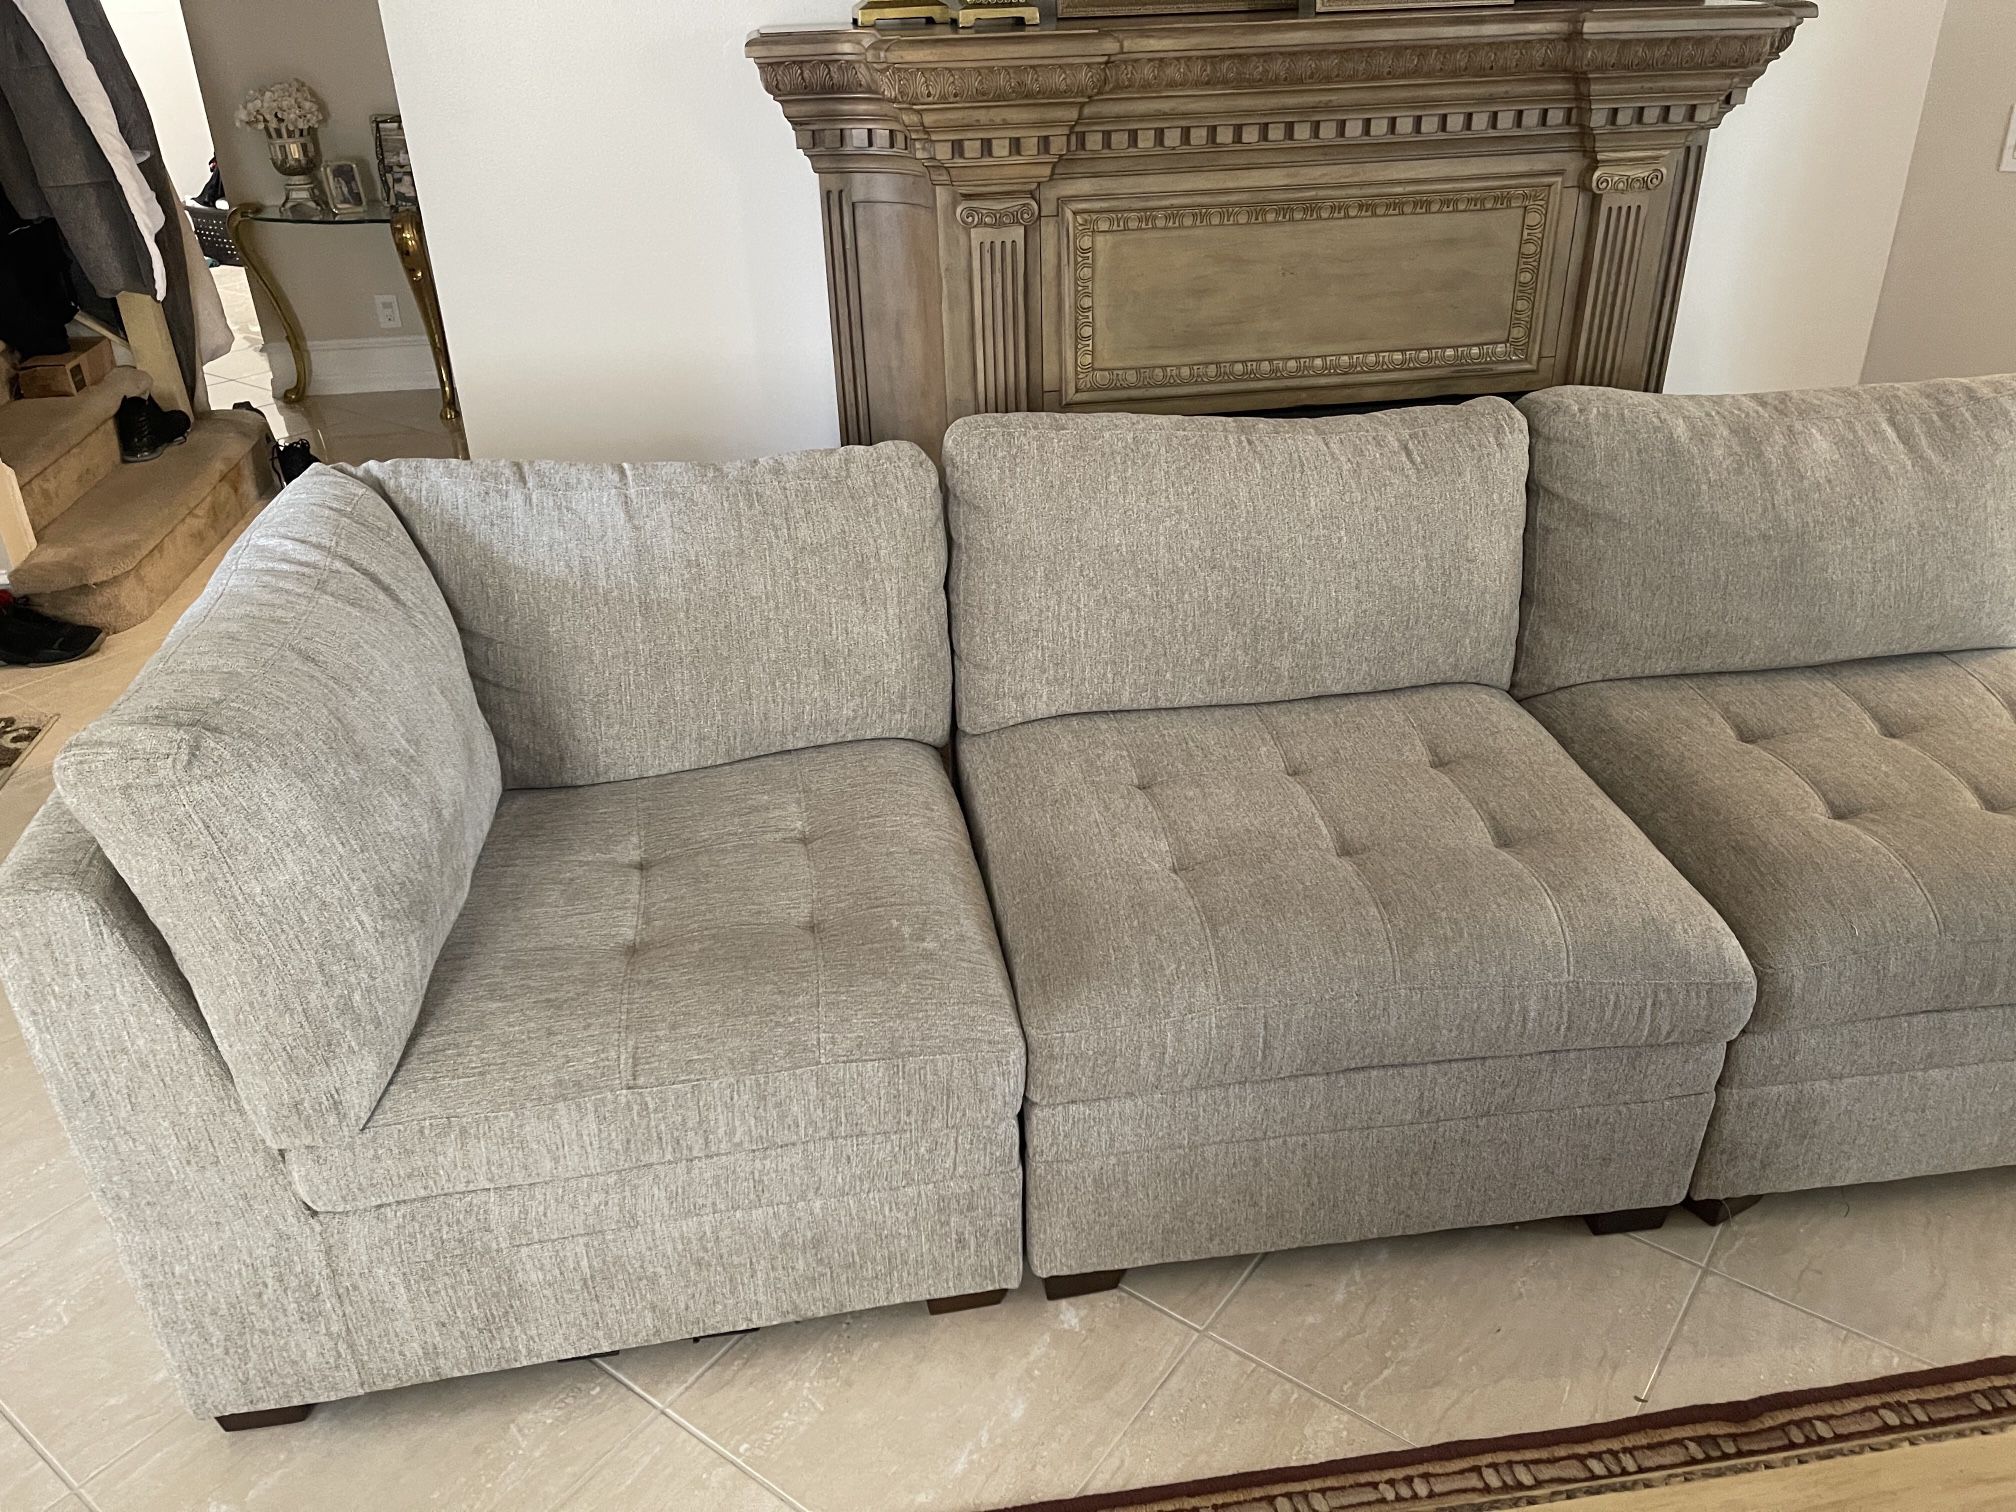 Thomasville Sofa / Couch with Storage - Taupe / Grey Plush